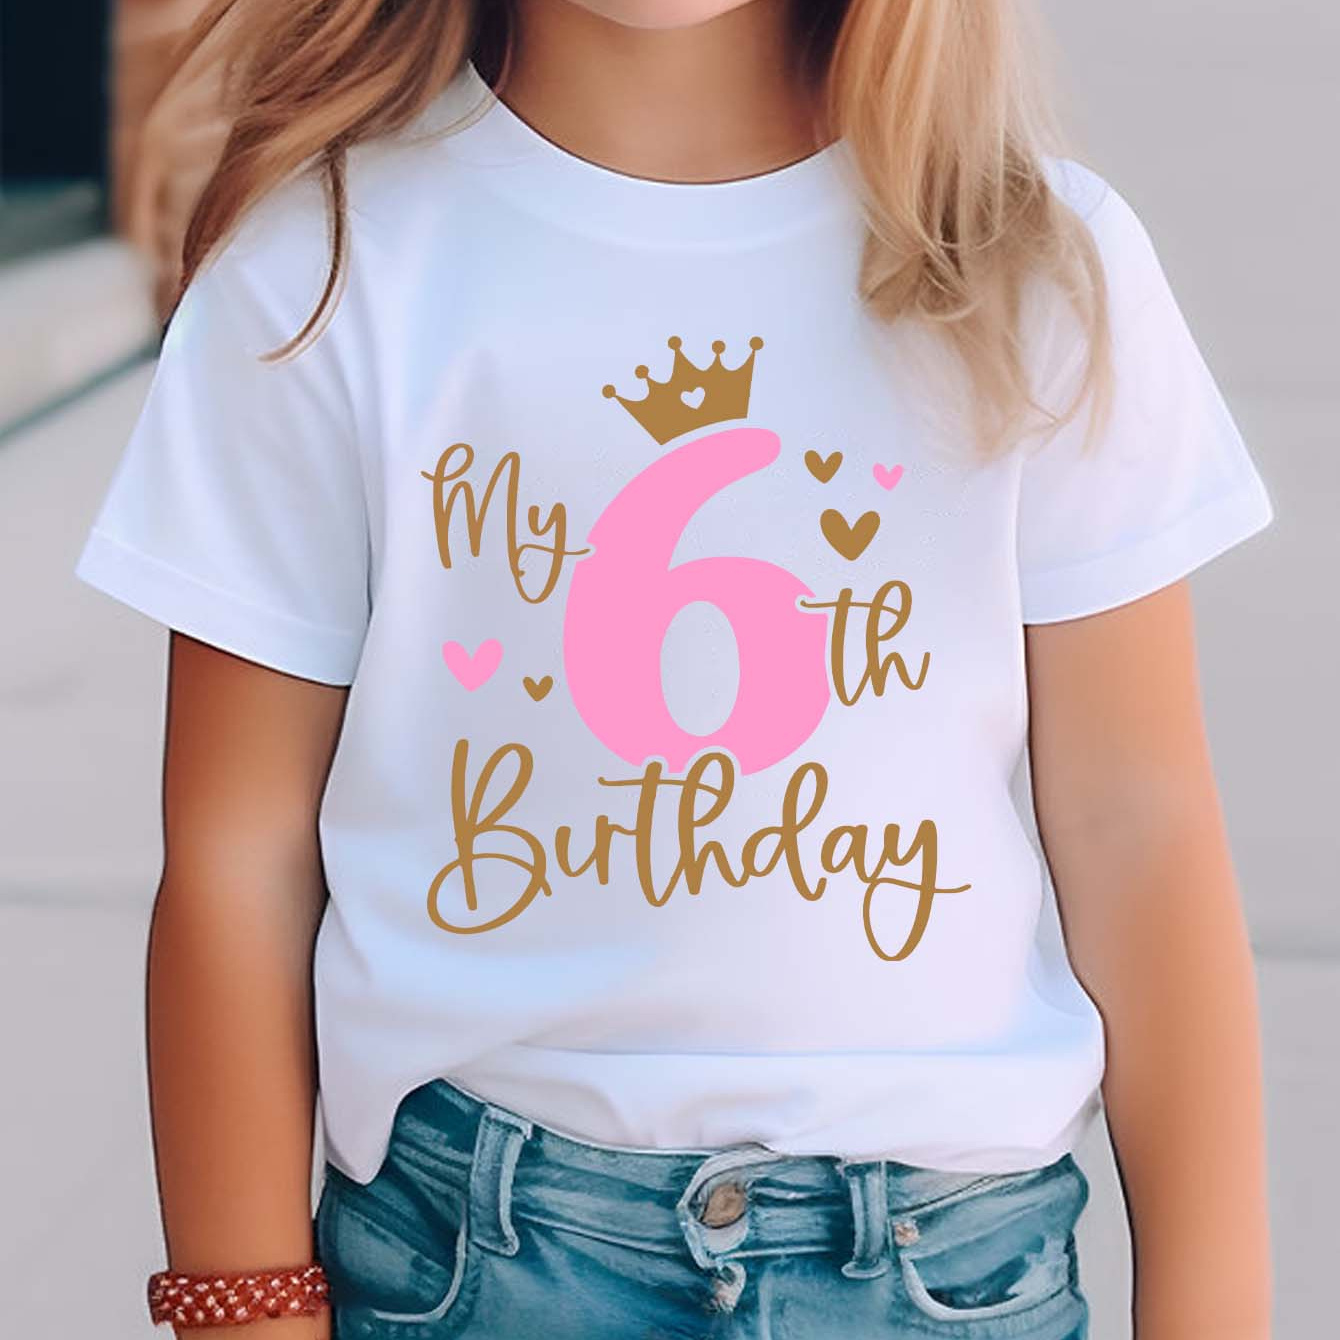 

Graffiti My 6th Birthday & Crown Graphic Print Tee, Girls' Casual & Comfy Crew Neck Short Sleeve Cotton T-shirt For Spring & Summer, Girls' Clothes For Outdoor Activities